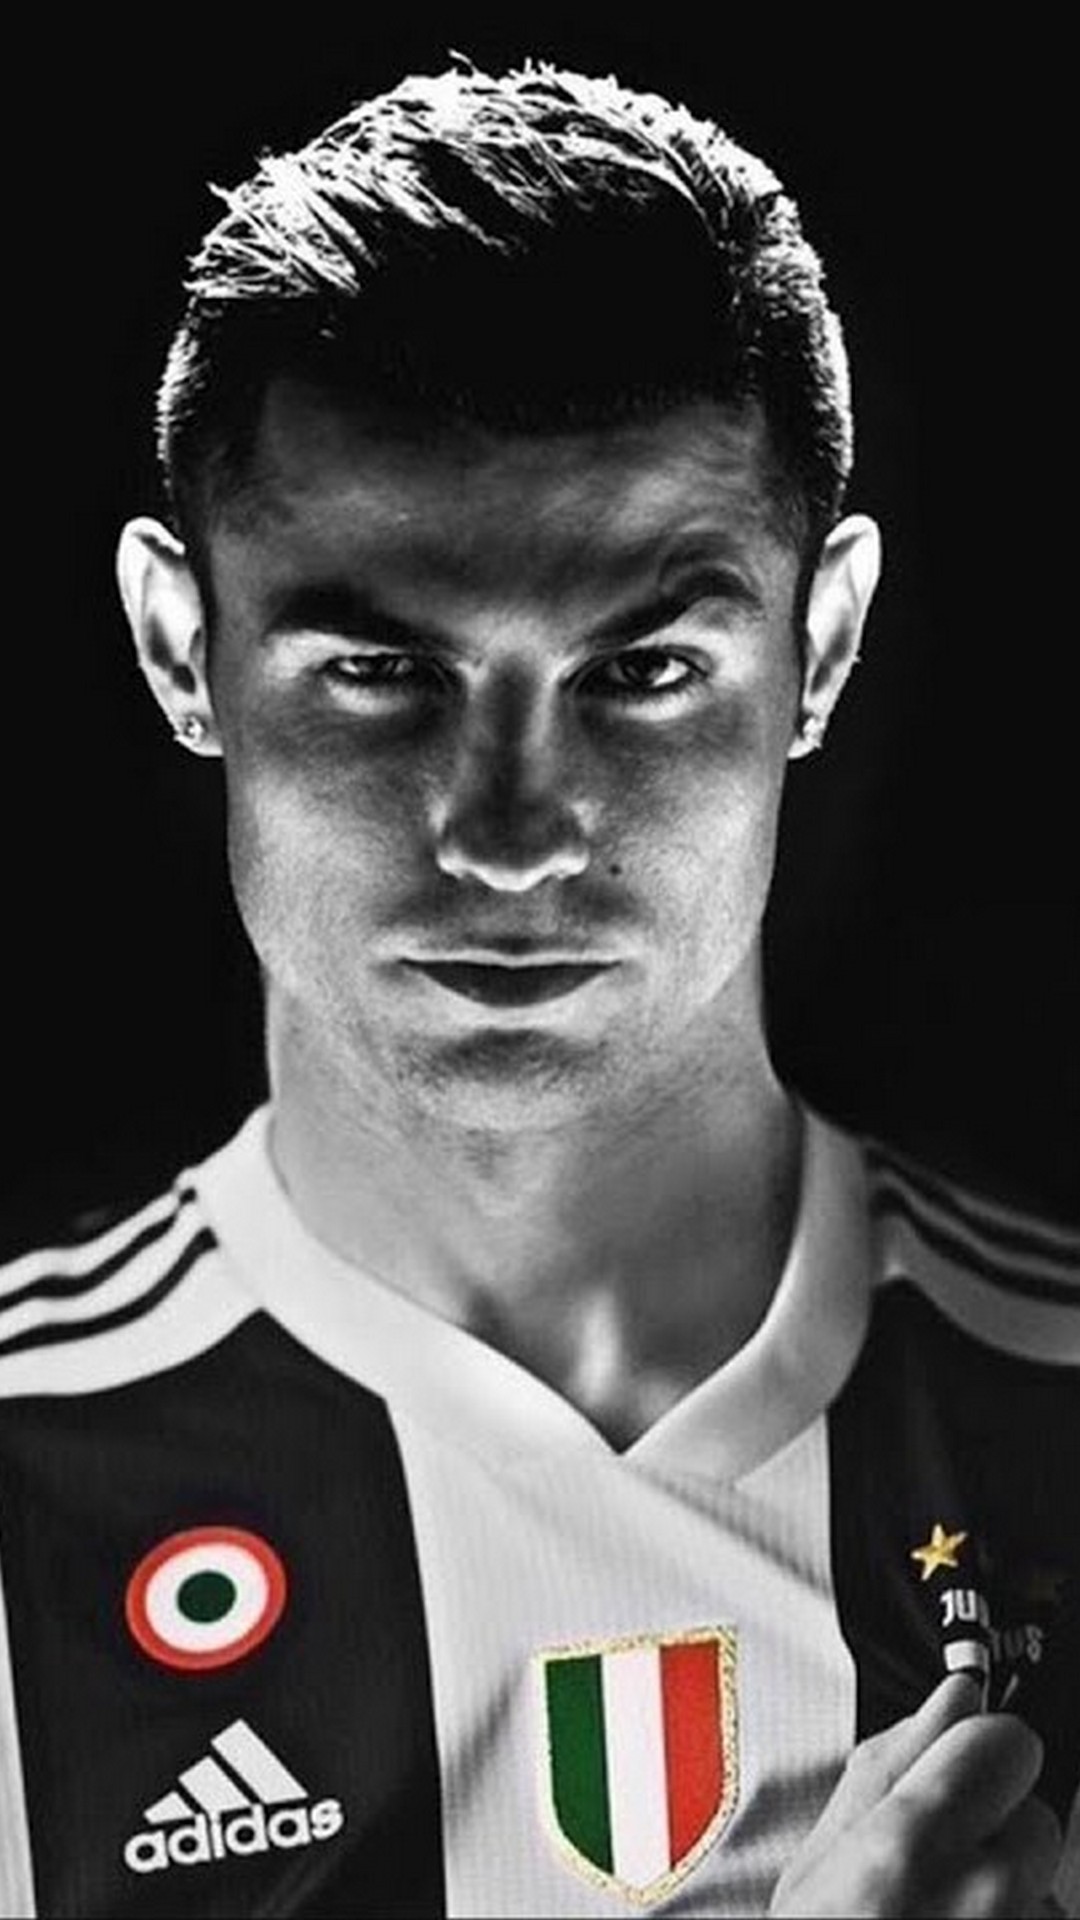 C Ronaldo Juventus Wallpaper iPhone with resolution 1080X1920 pixel. You can make this wallpaper for your iPhone 5, 6, 7, 8, X backgrounds, Mobile Screensaver, or iPad Lock Screen